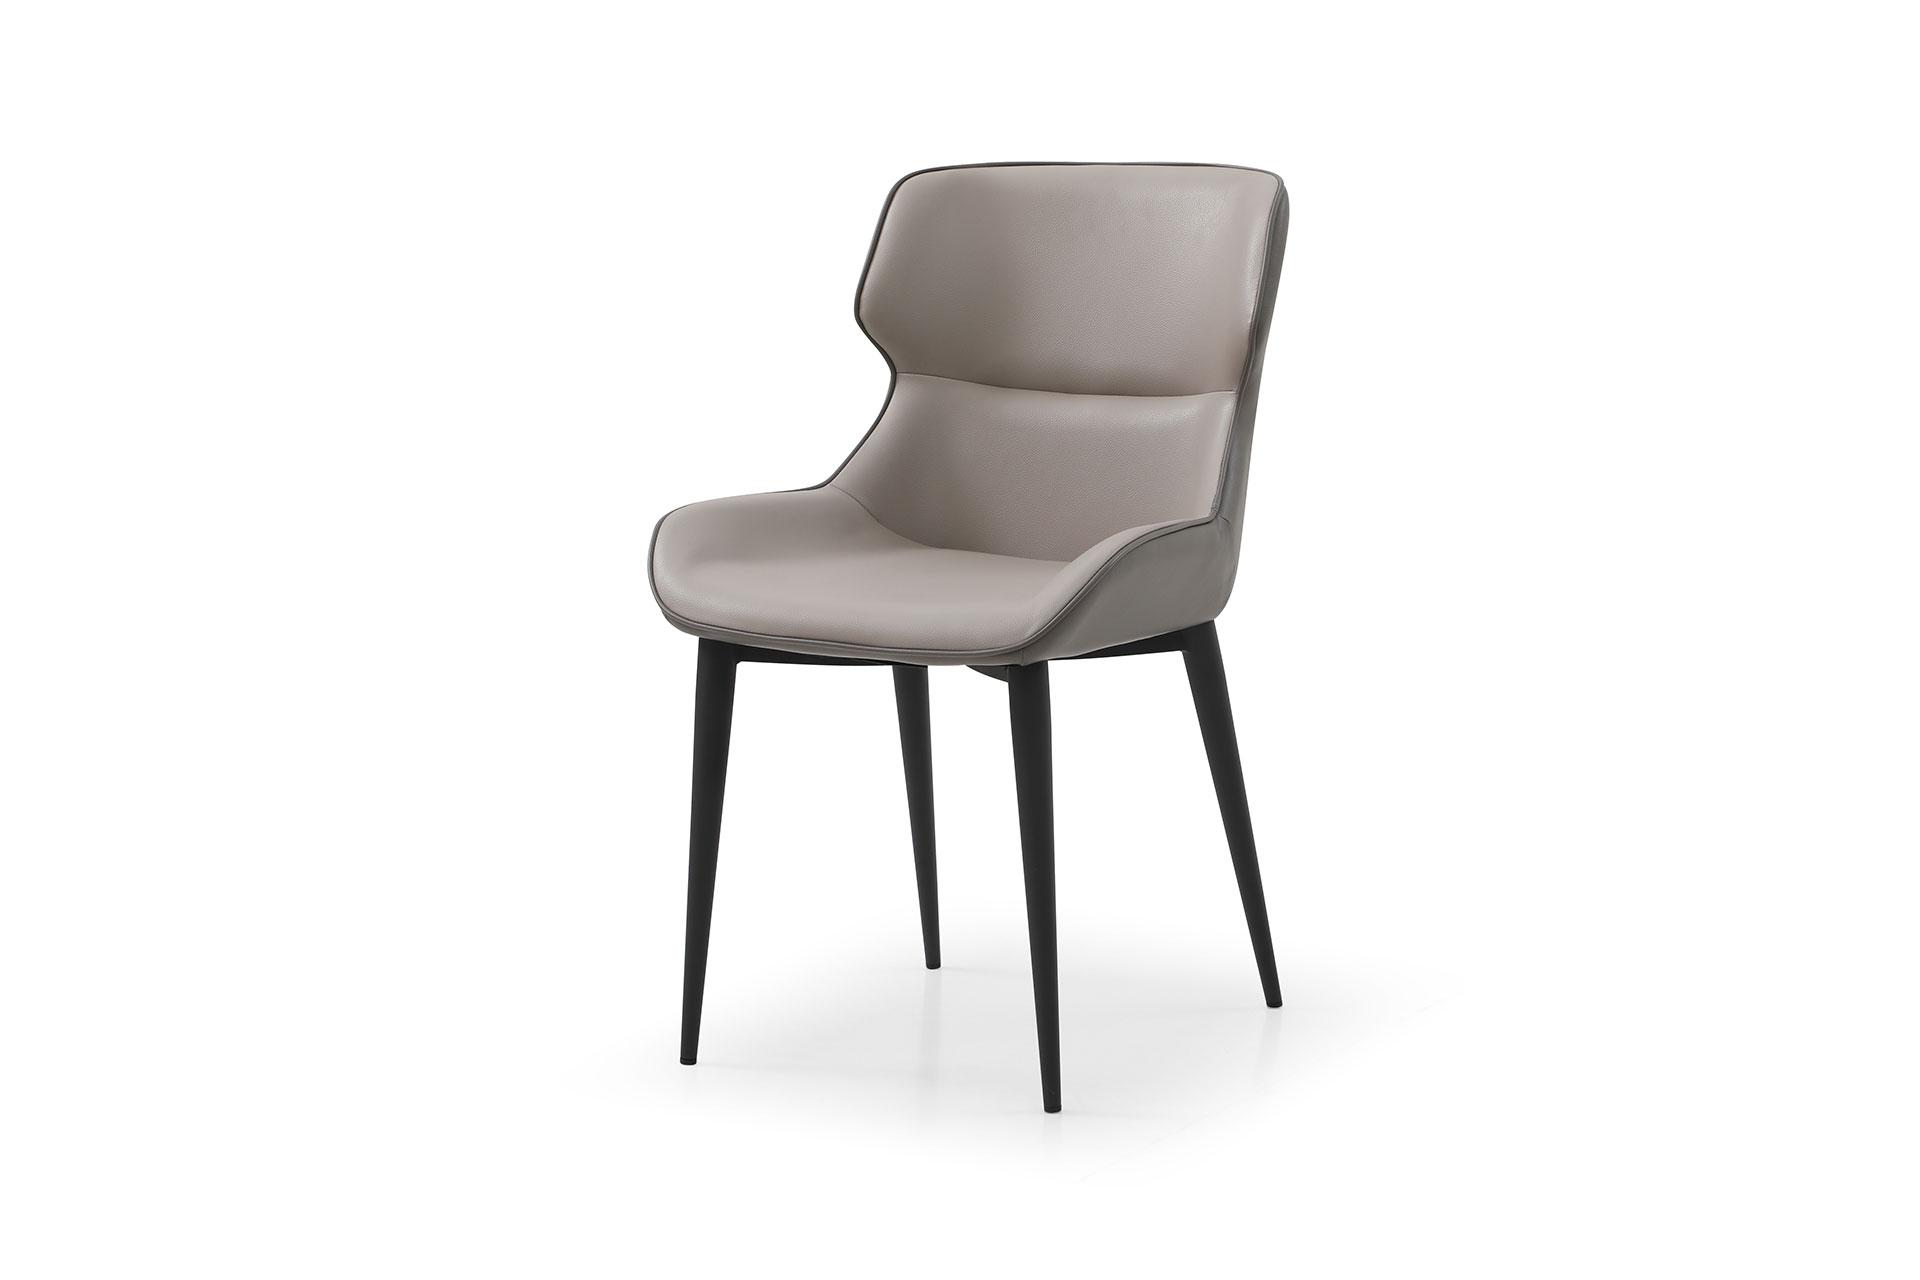 Modern Dining Chair Set DC1709P-LGRY/DGRY Morocco DC1709P-LGRY/DGRY in Light Gray Faux Leather